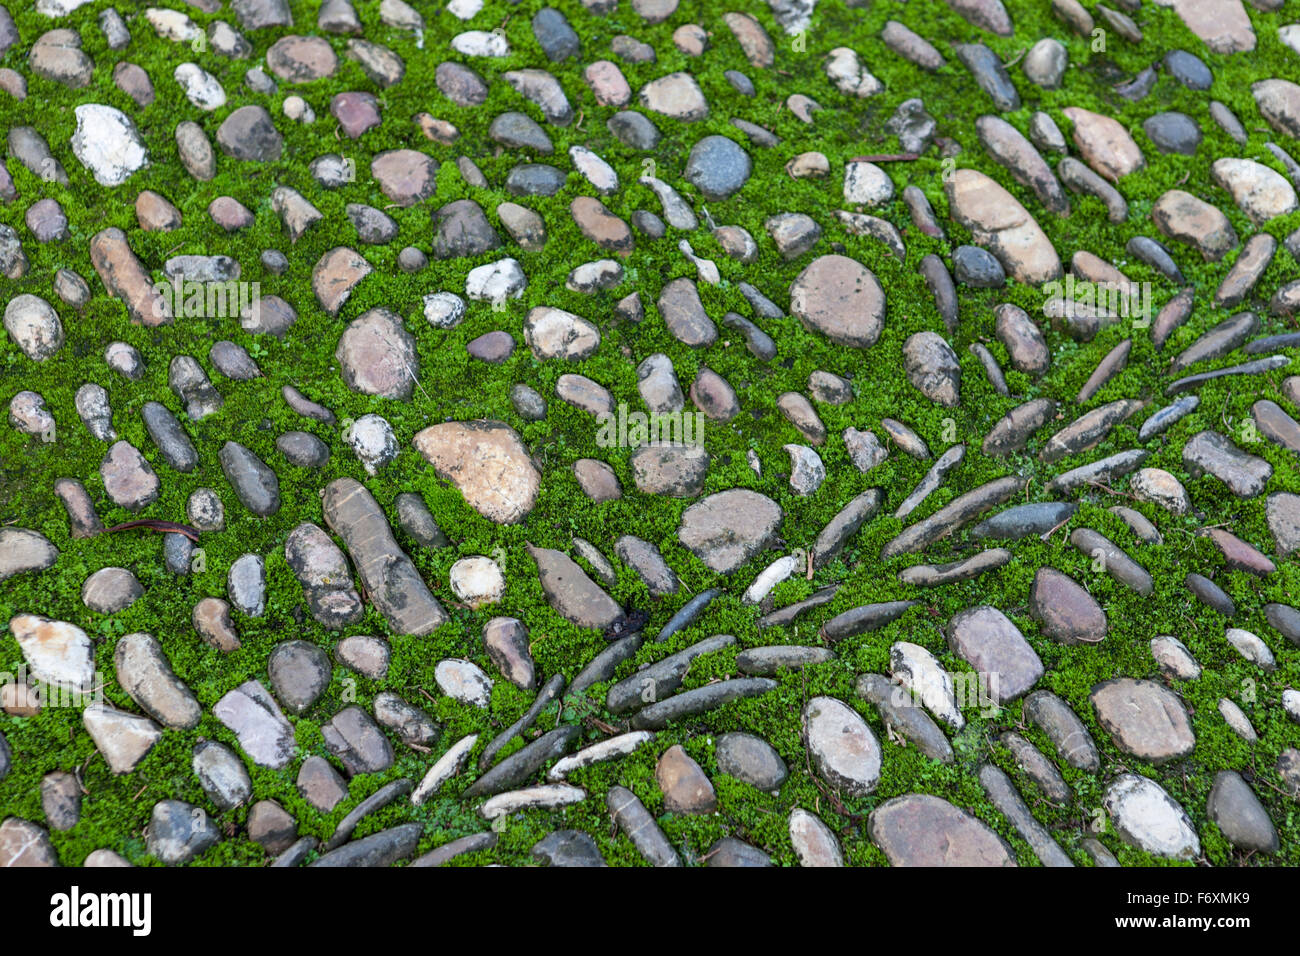 Mossy patterned stone pavement near the Mezquita in Cordoba, Spain Stock Photo